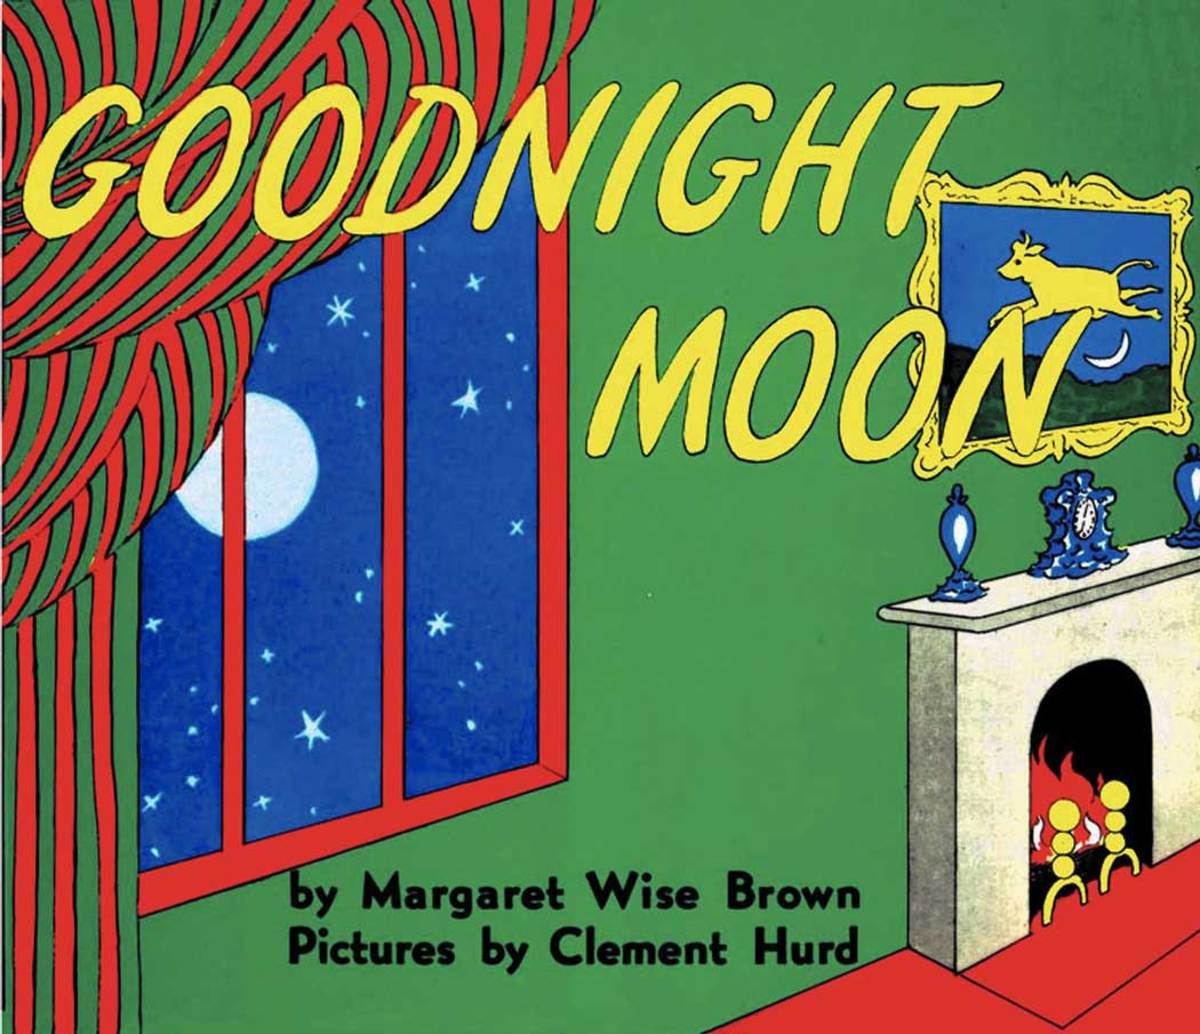 Goodnight Moon by Margaret Wise Brown, who also wrote classic Little Golden Book titles.